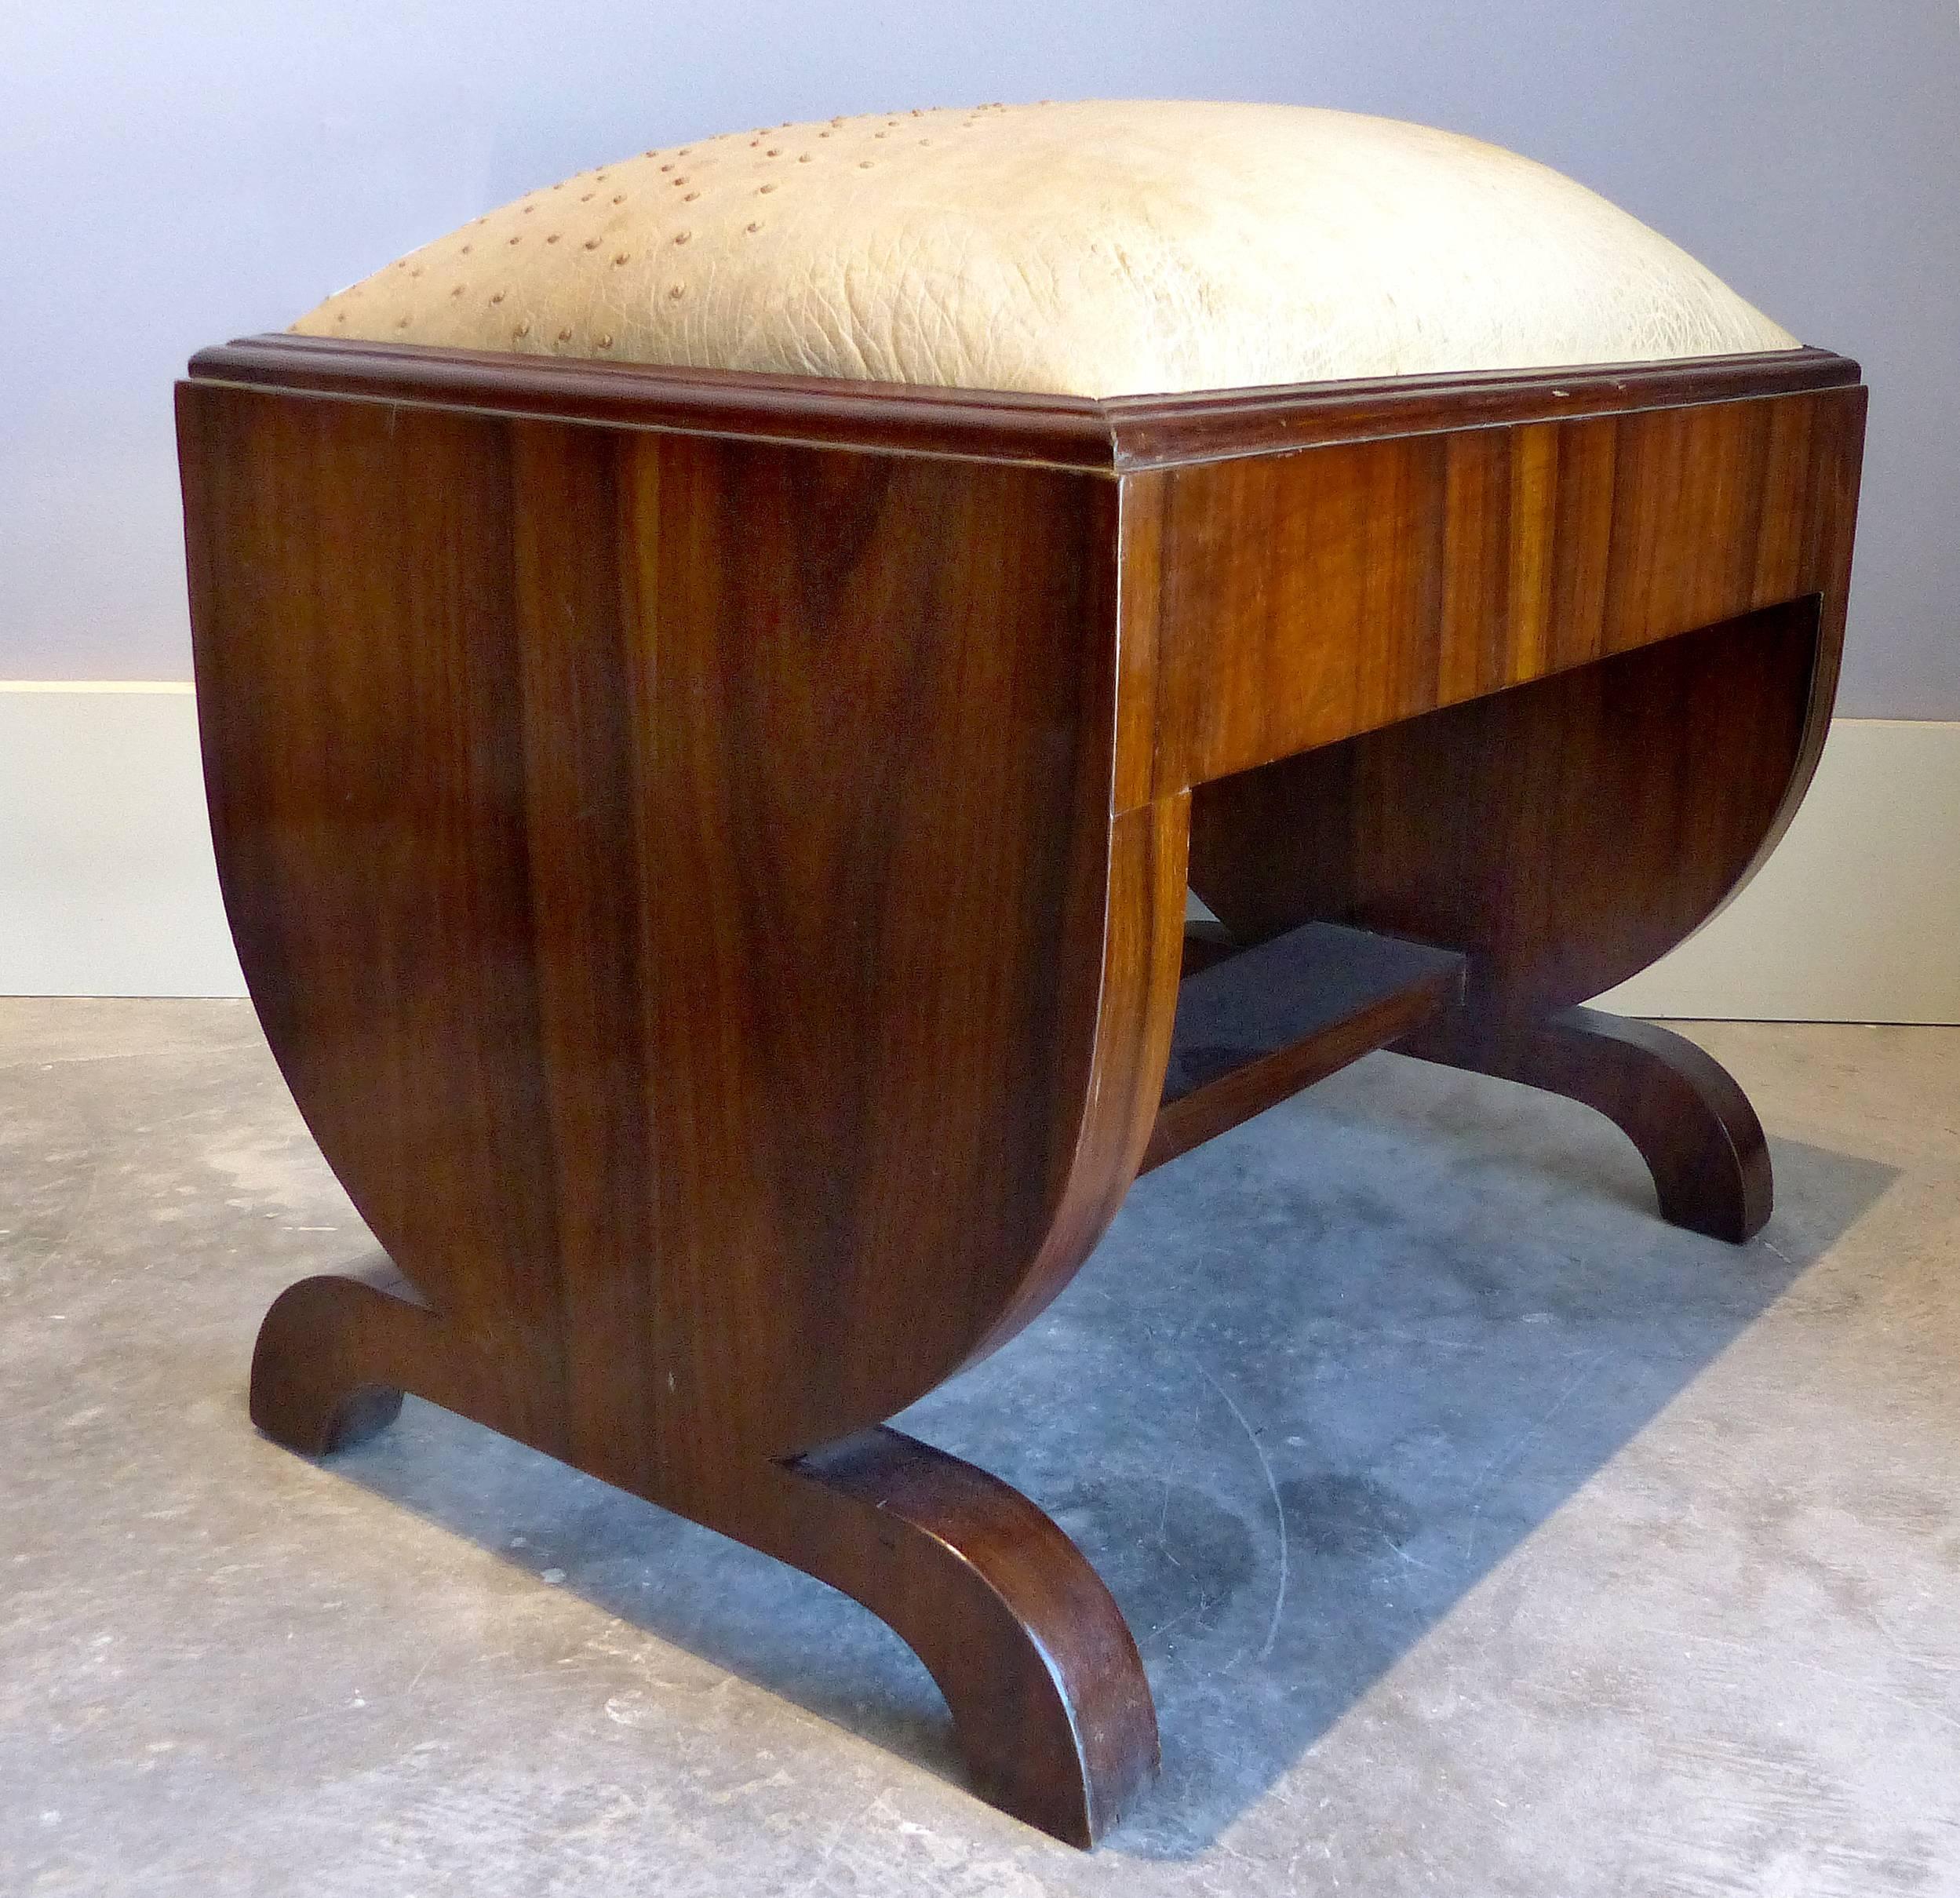 Brazilian Art Deco Mahogany Footstools with Ostrich Skin Upholstery